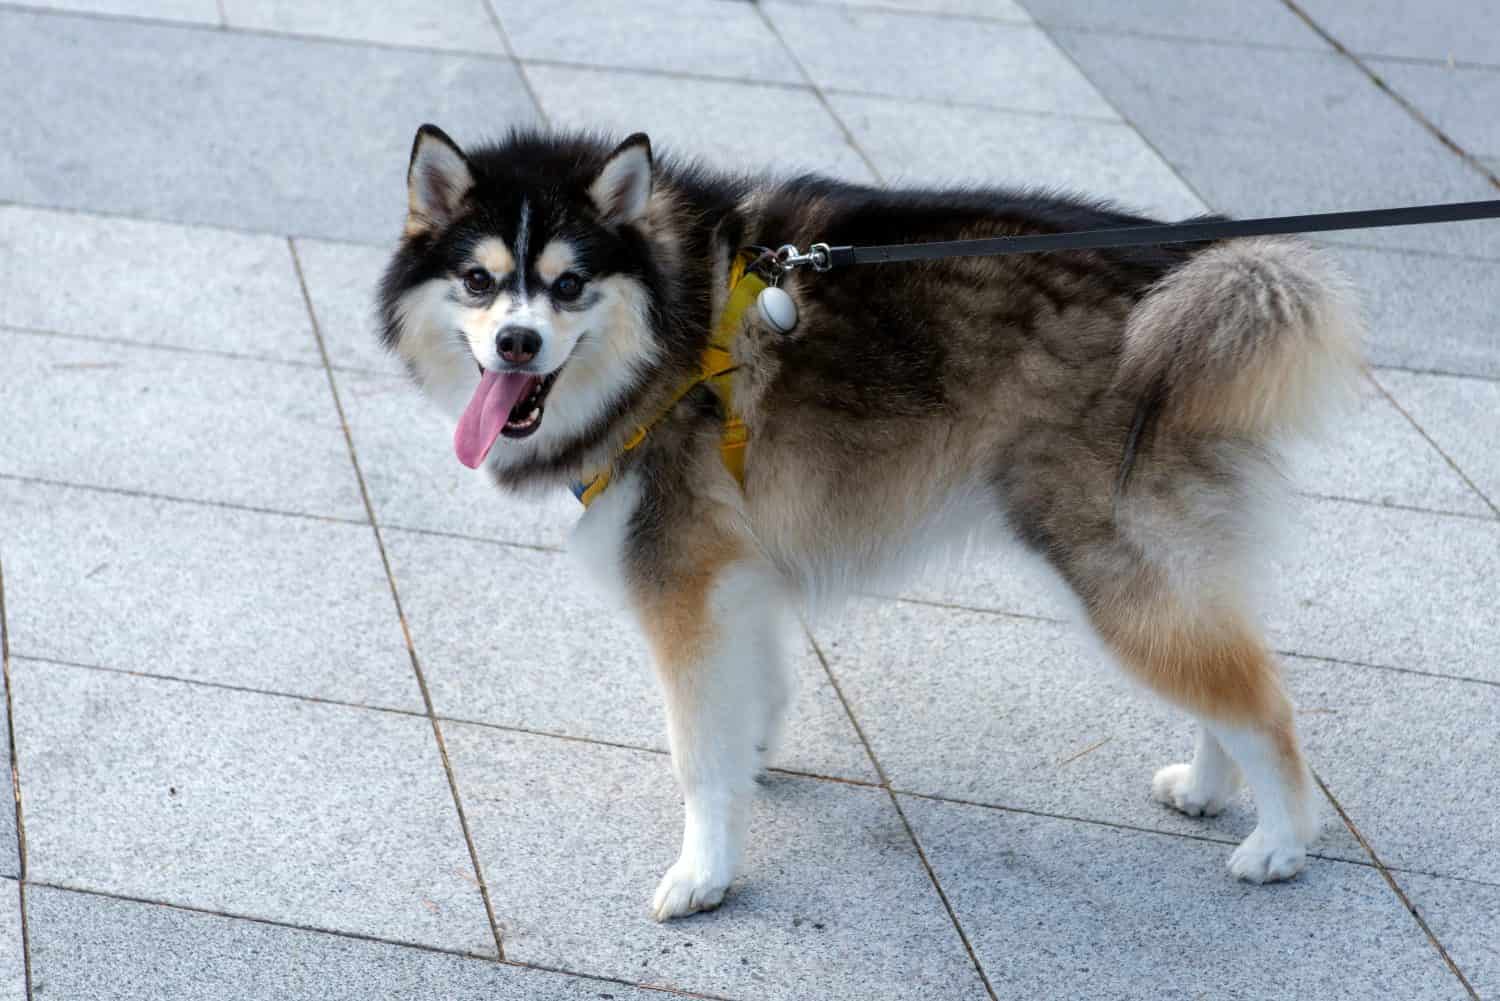 The Pomsky is a cross of the Siberian husky and the Pomeranian, also known as the Pomeranian Husky Mix. It's a small to medium dog breed at about 10 to 15 inches tall, weighing between 20 to 30 pounds